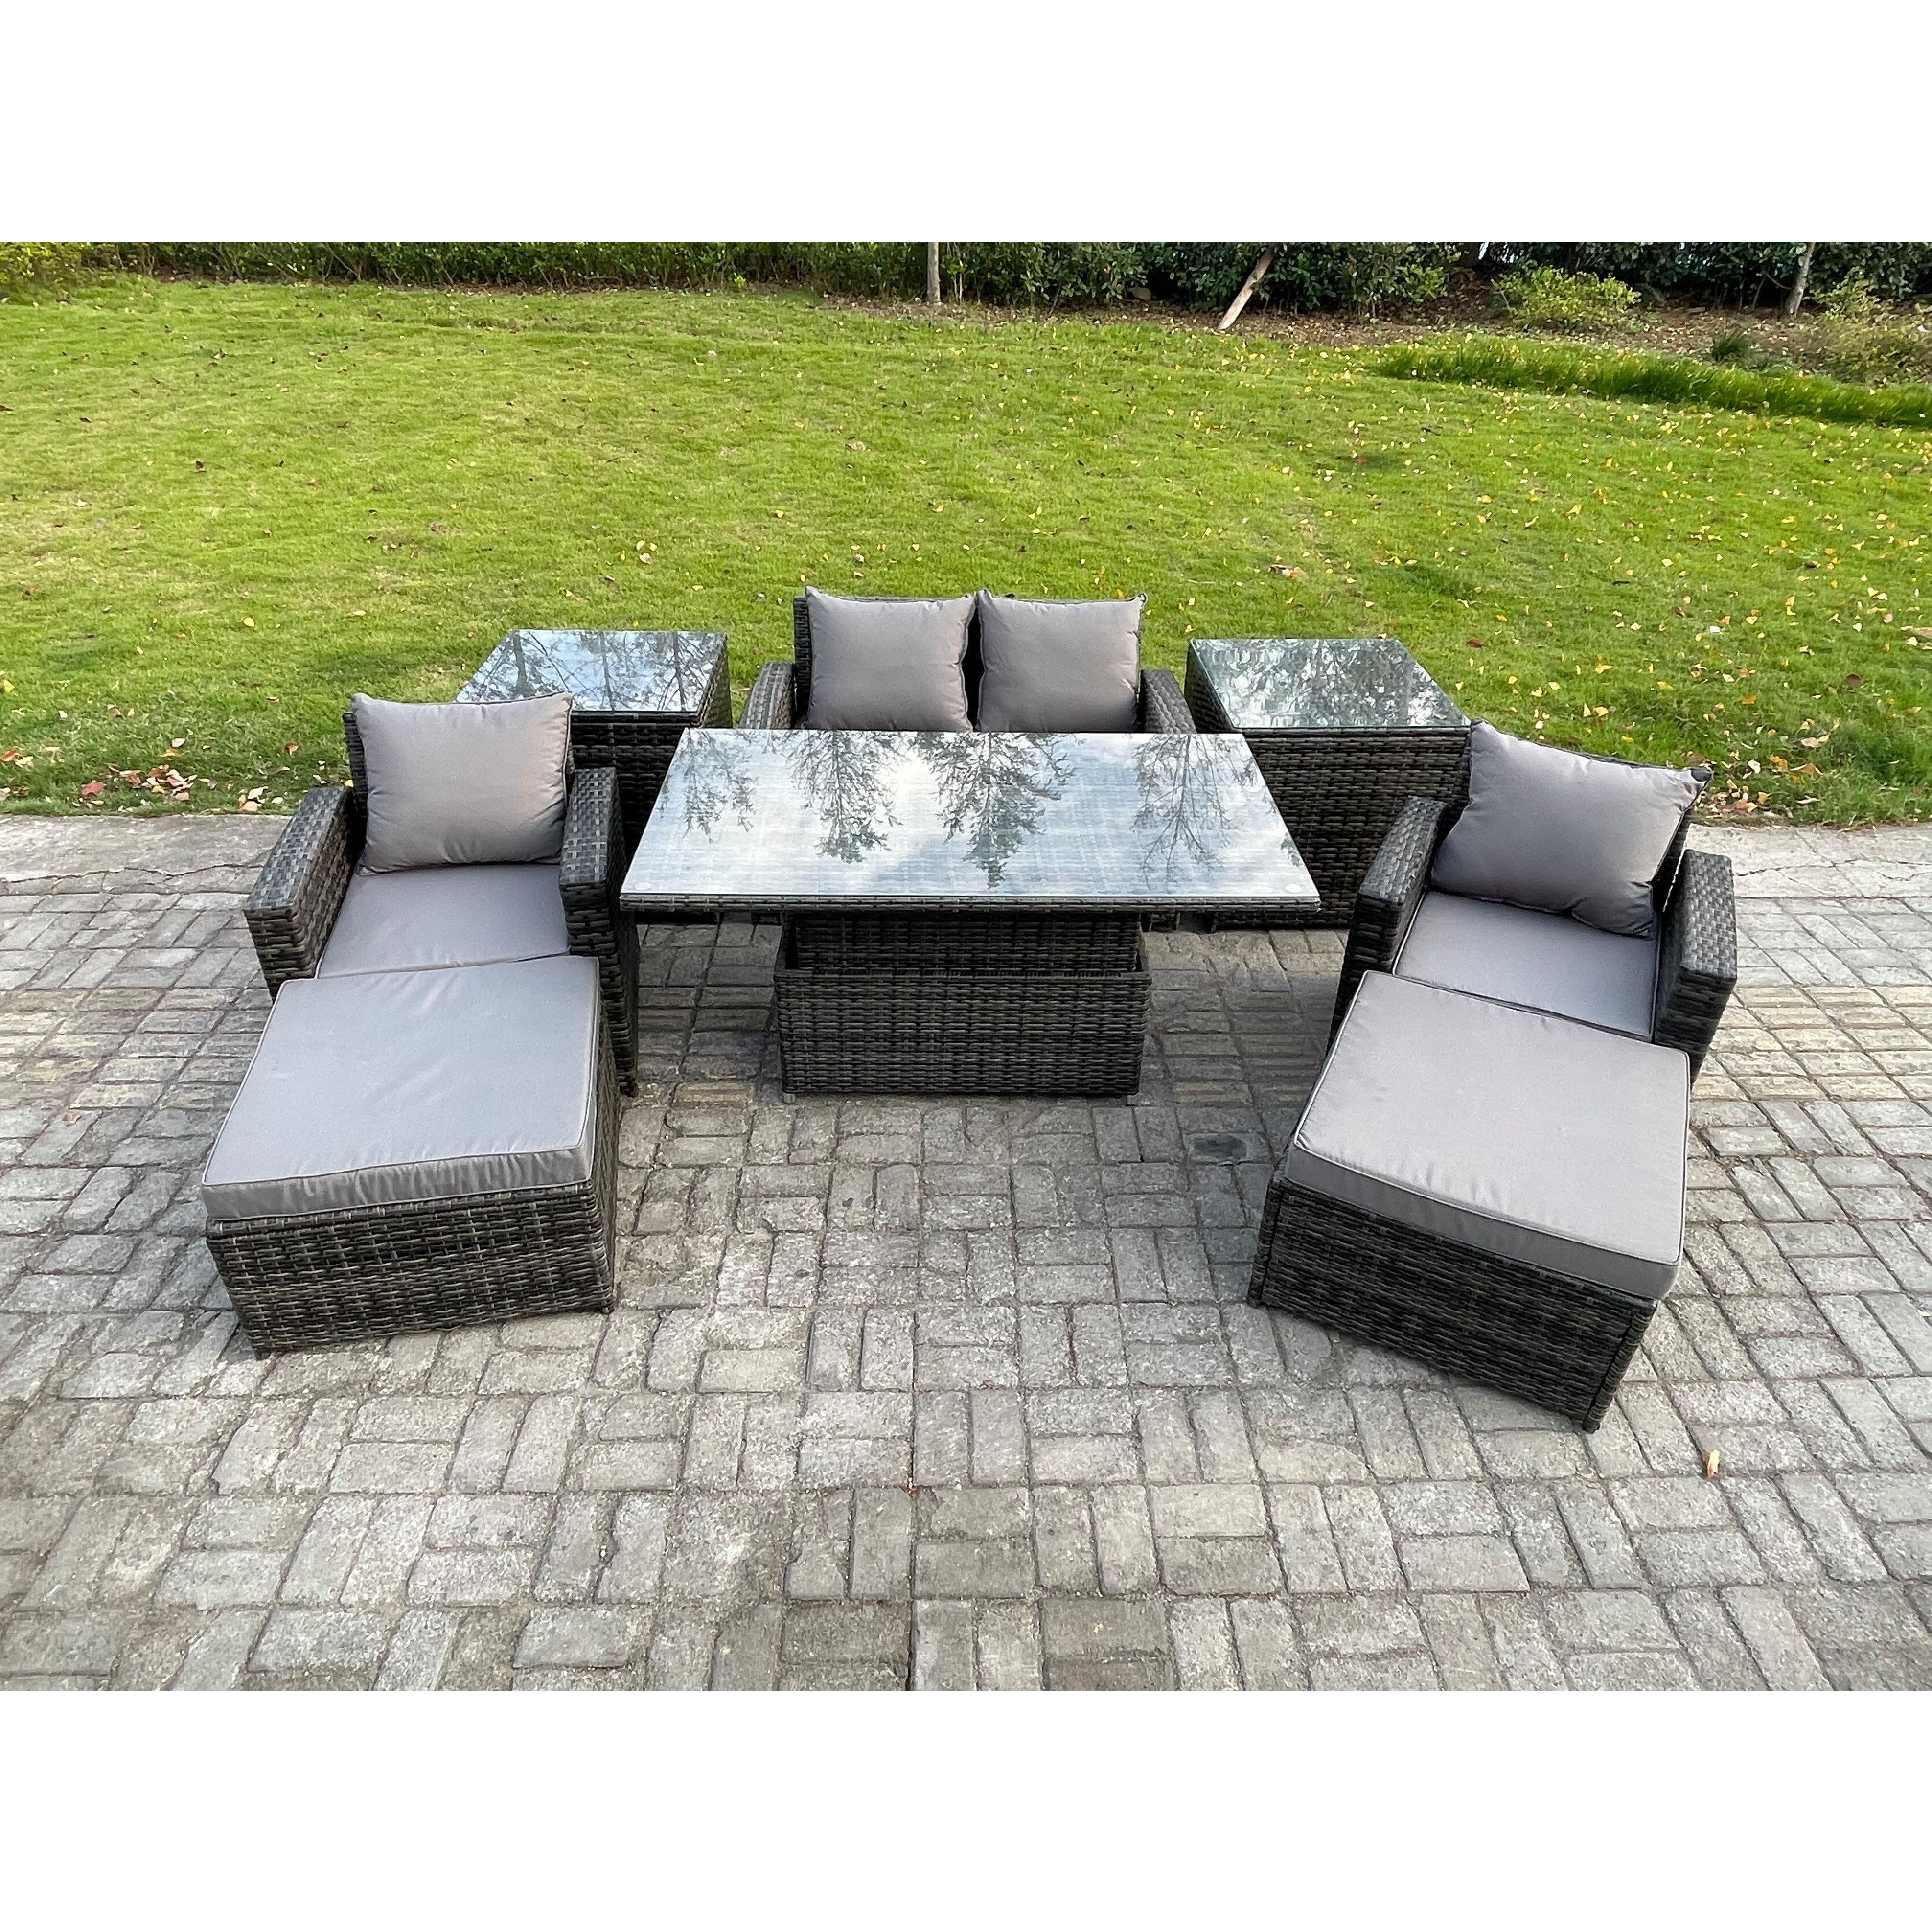 High Back Rattan Garden Furniture Sofa Sets with Height Adjustable Rising Lifting Table 2 Side Tables 2 Big Footstool - image 1